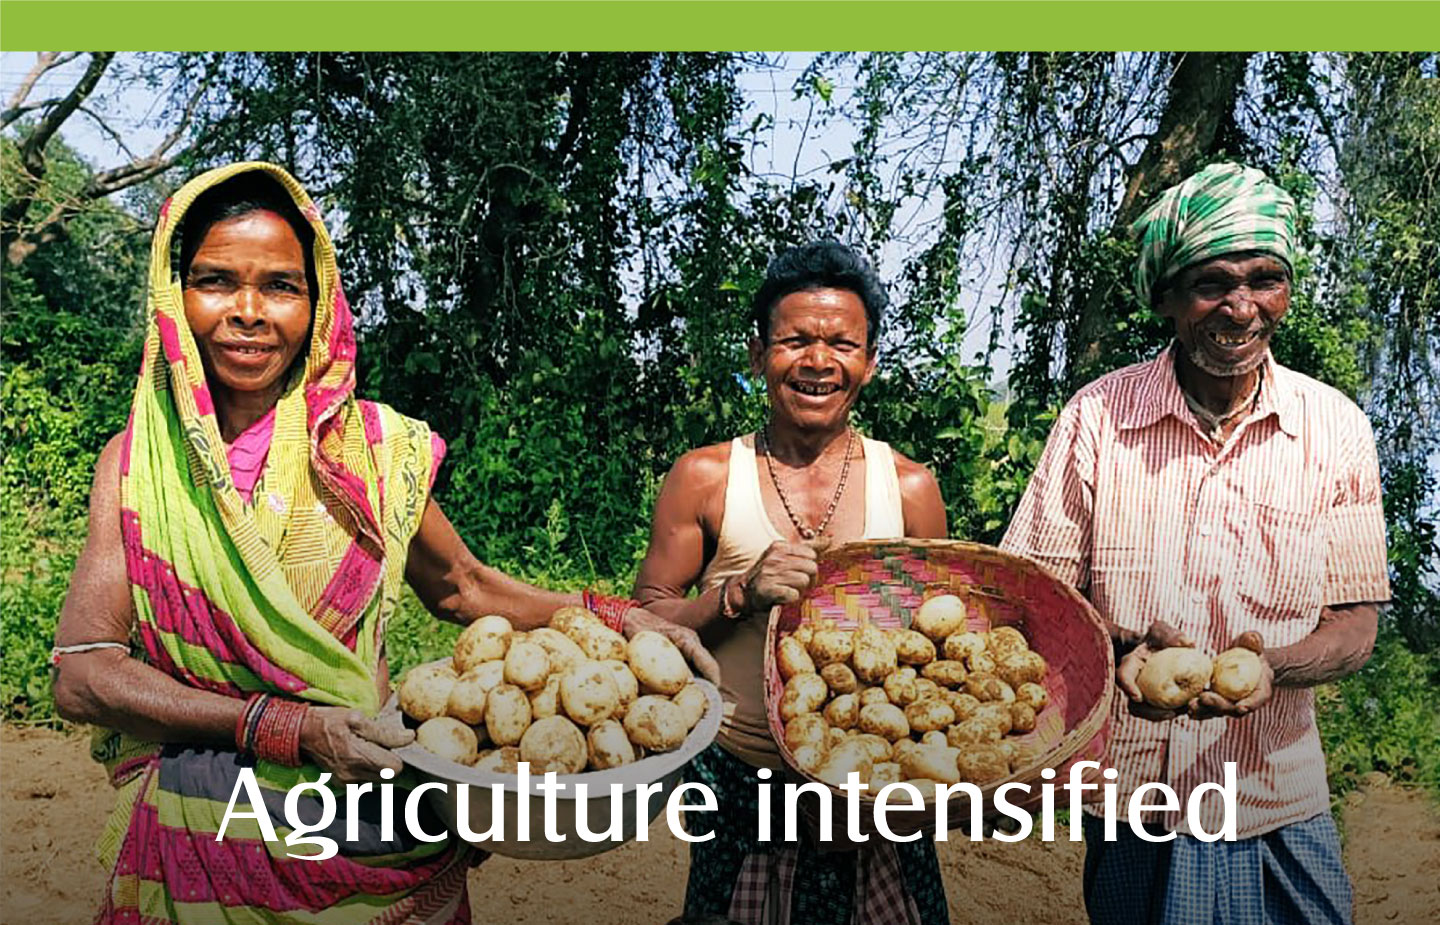 Agriculture intensified